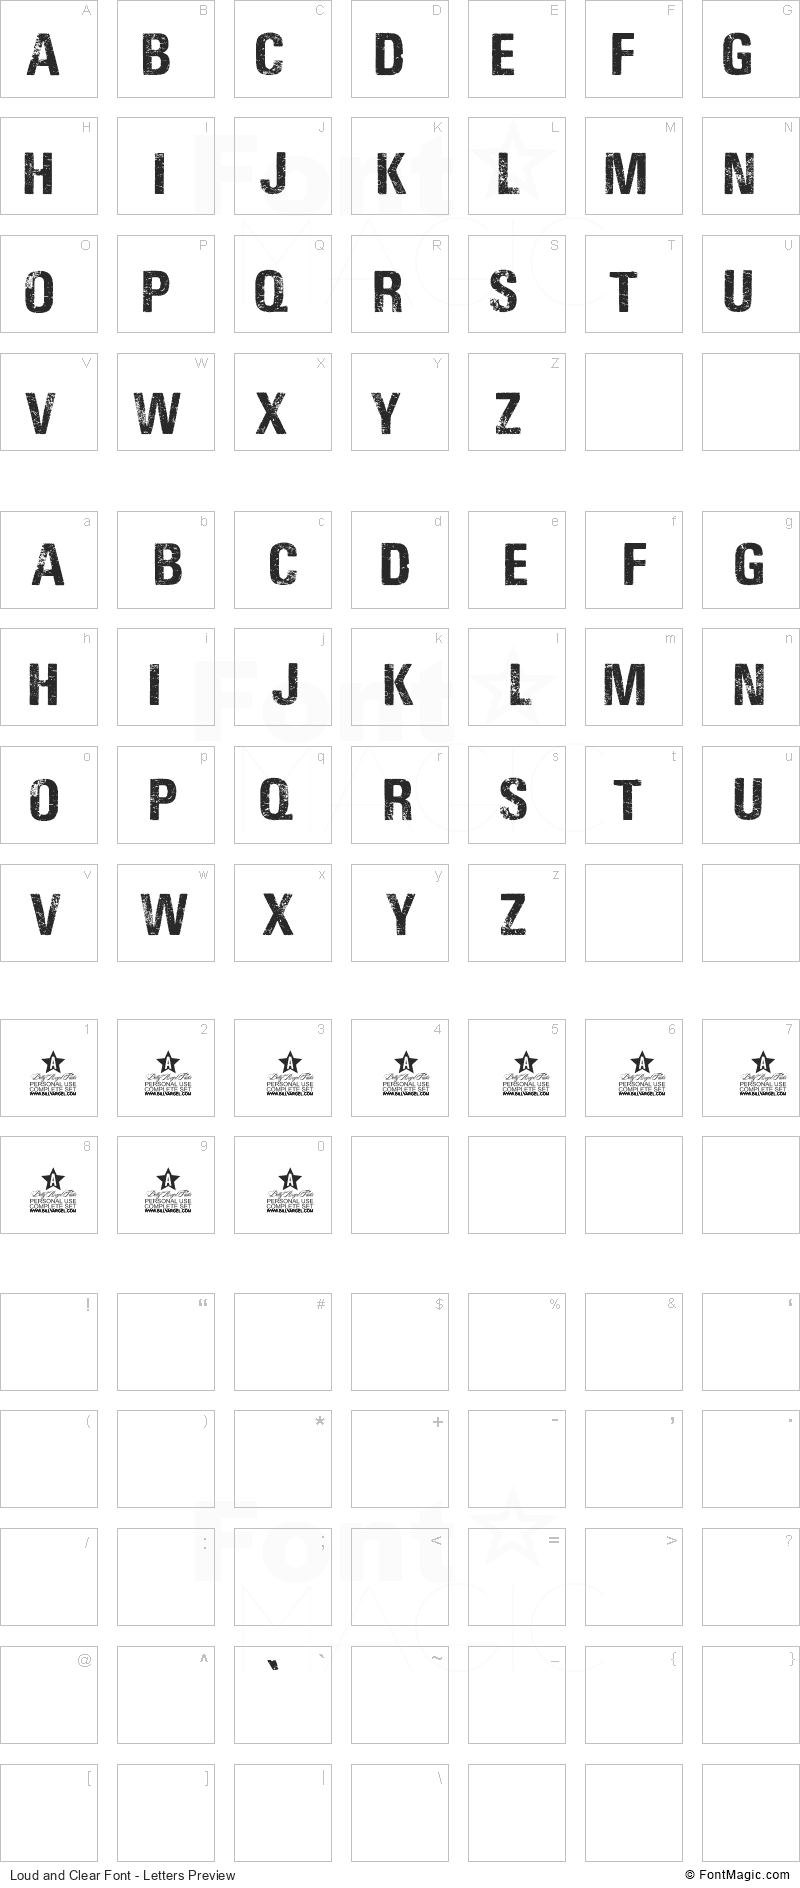 Loud and Clear Font - All Latters Preview Chart